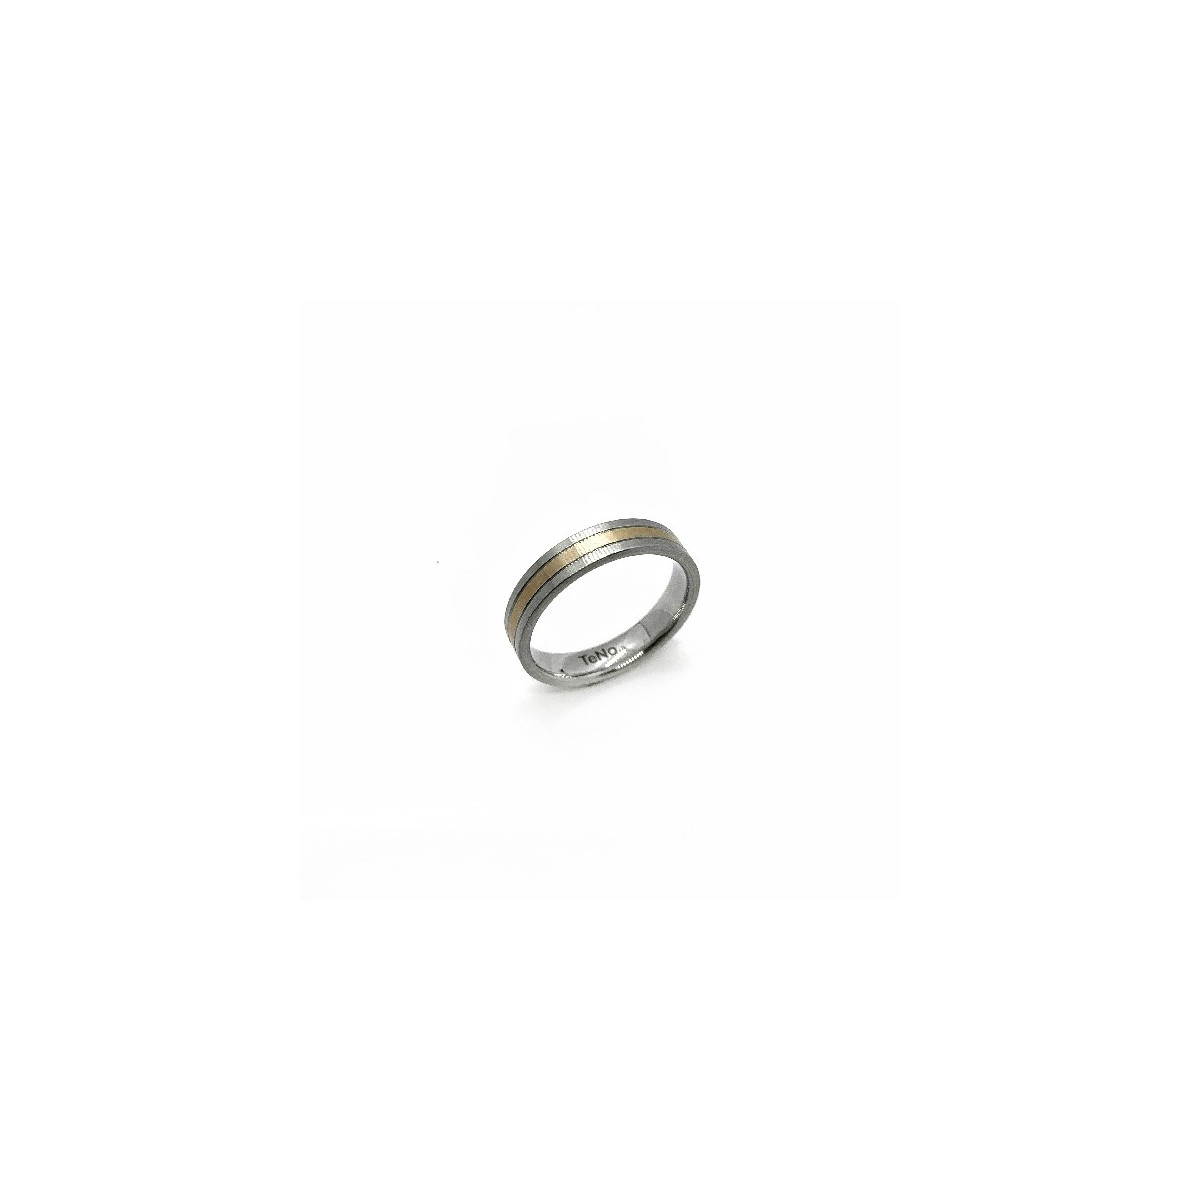 STEEL AND GOLD TENO RING - 068.1800.D30RG.60